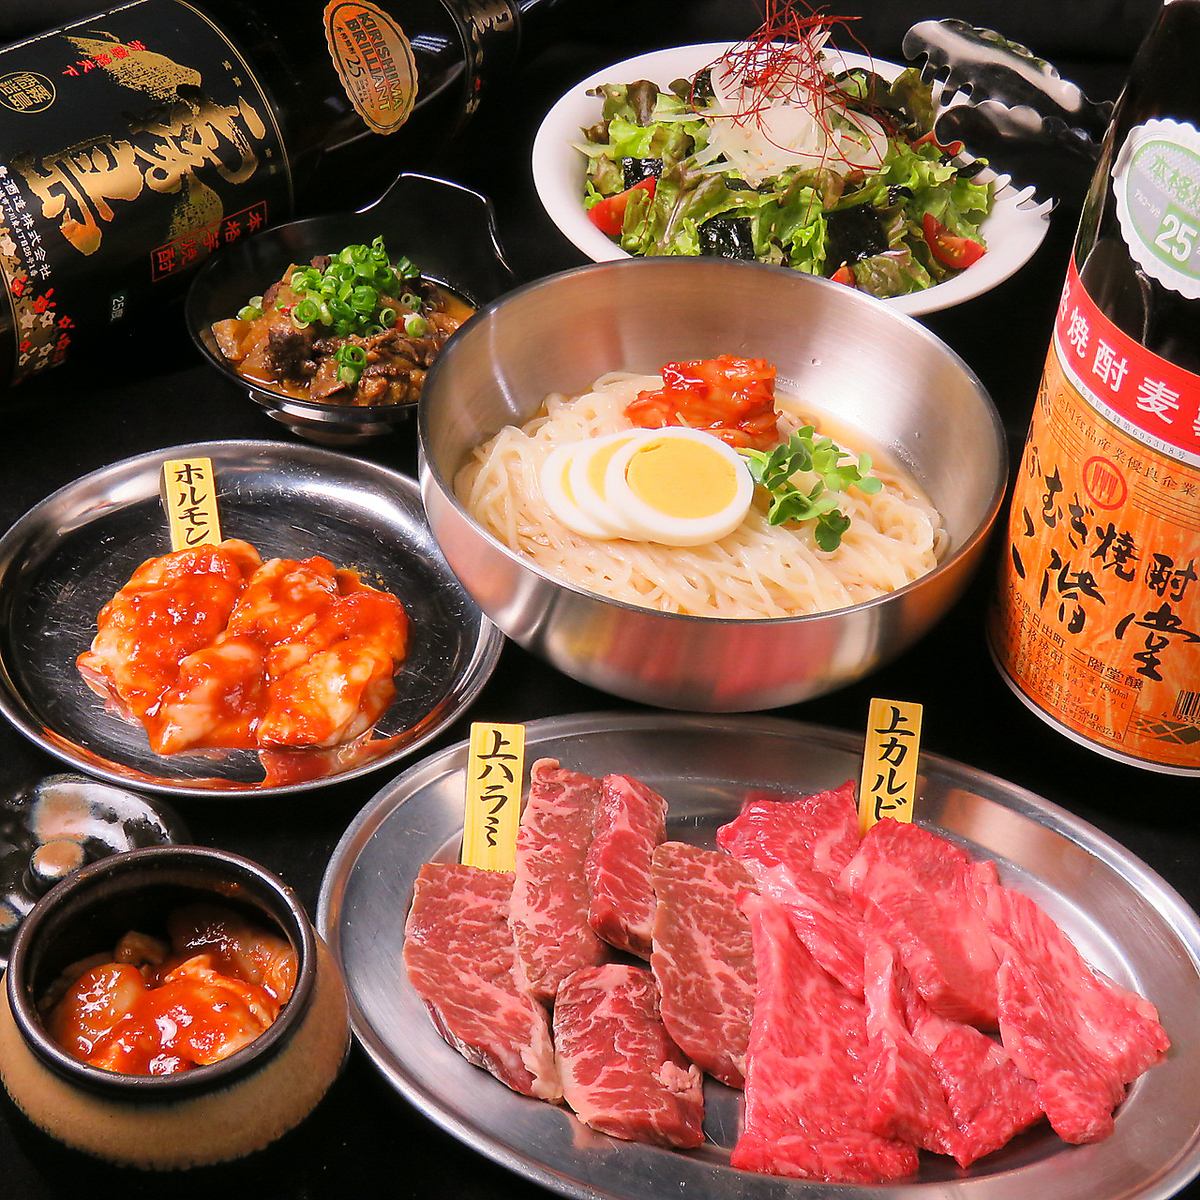 A yakiniku restaurant where you can enjoy private rooms and carefully selected meat♪ We look forward to your visit!